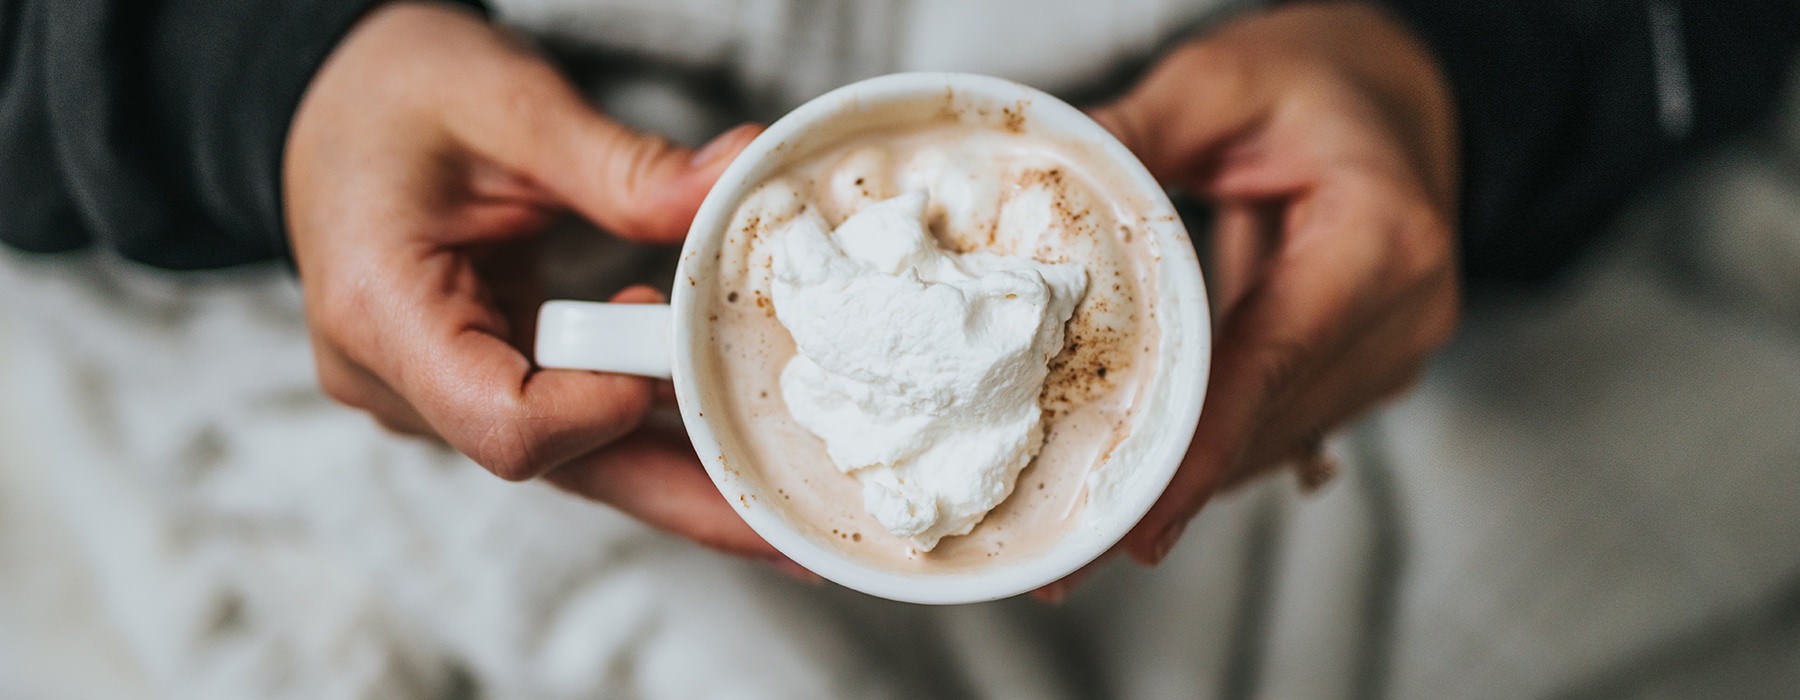 overhead shot of hands holding a mug of hot chocolate with whipped cream